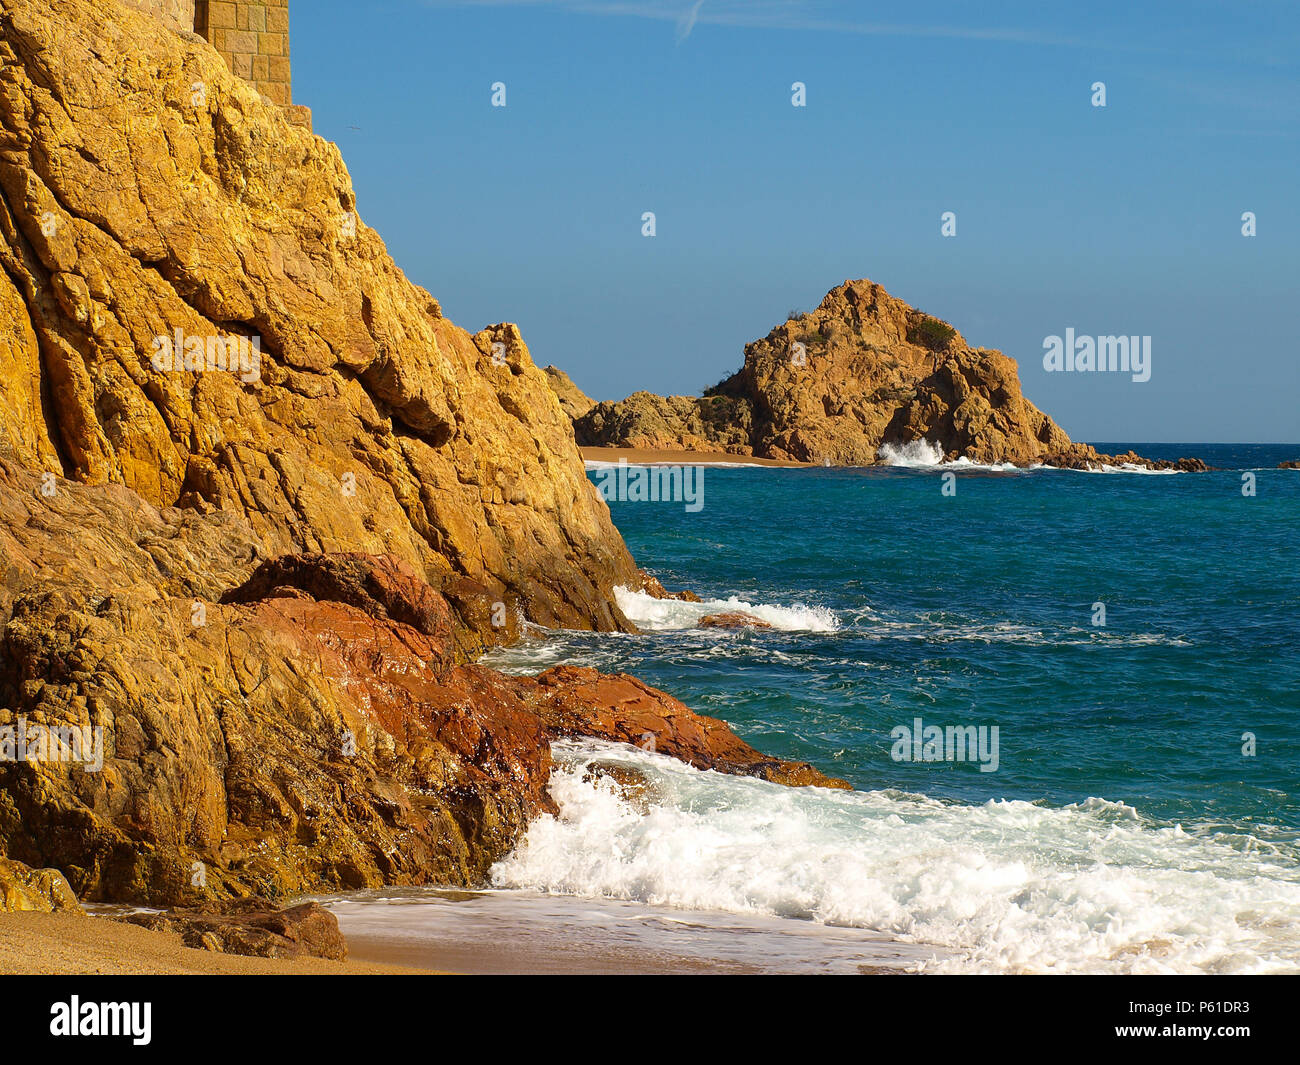 Seascape with the Mediterranean Sea and golden rocks on the beaches of Tossa de Mar, Spain Stock Photo